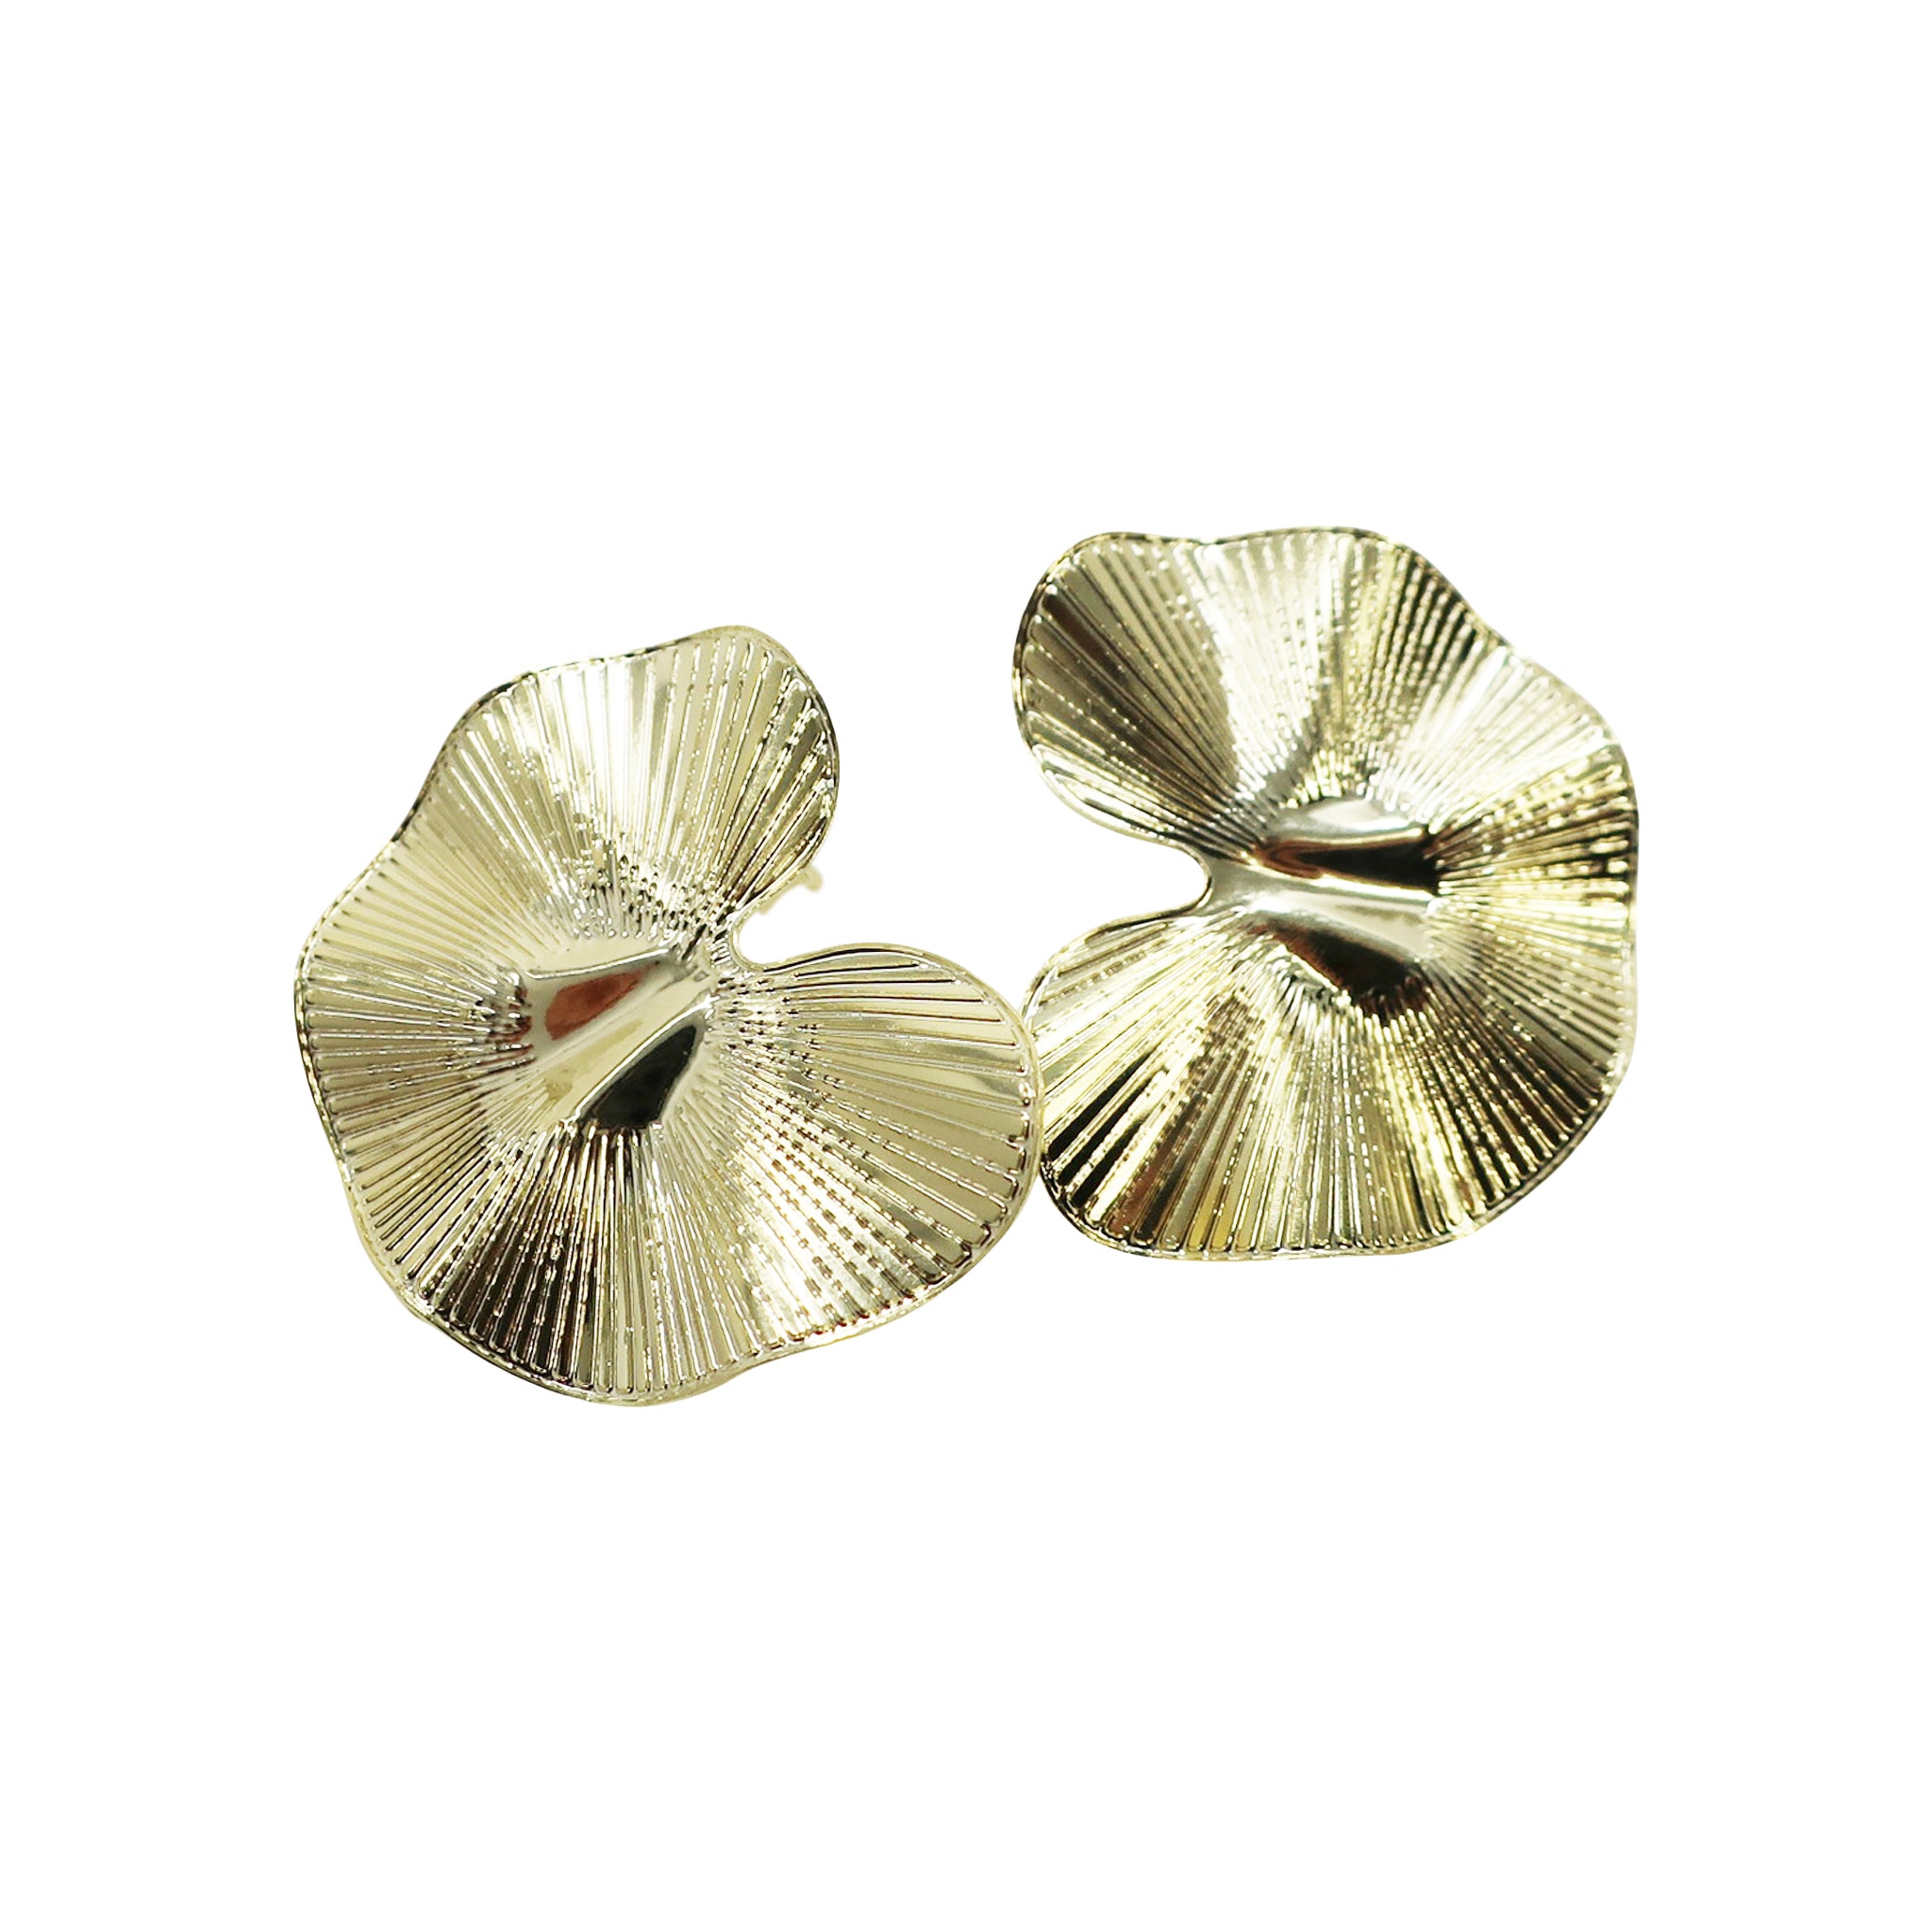 Sheila Fajl Small Clay Stud Earrings in Gold Plated